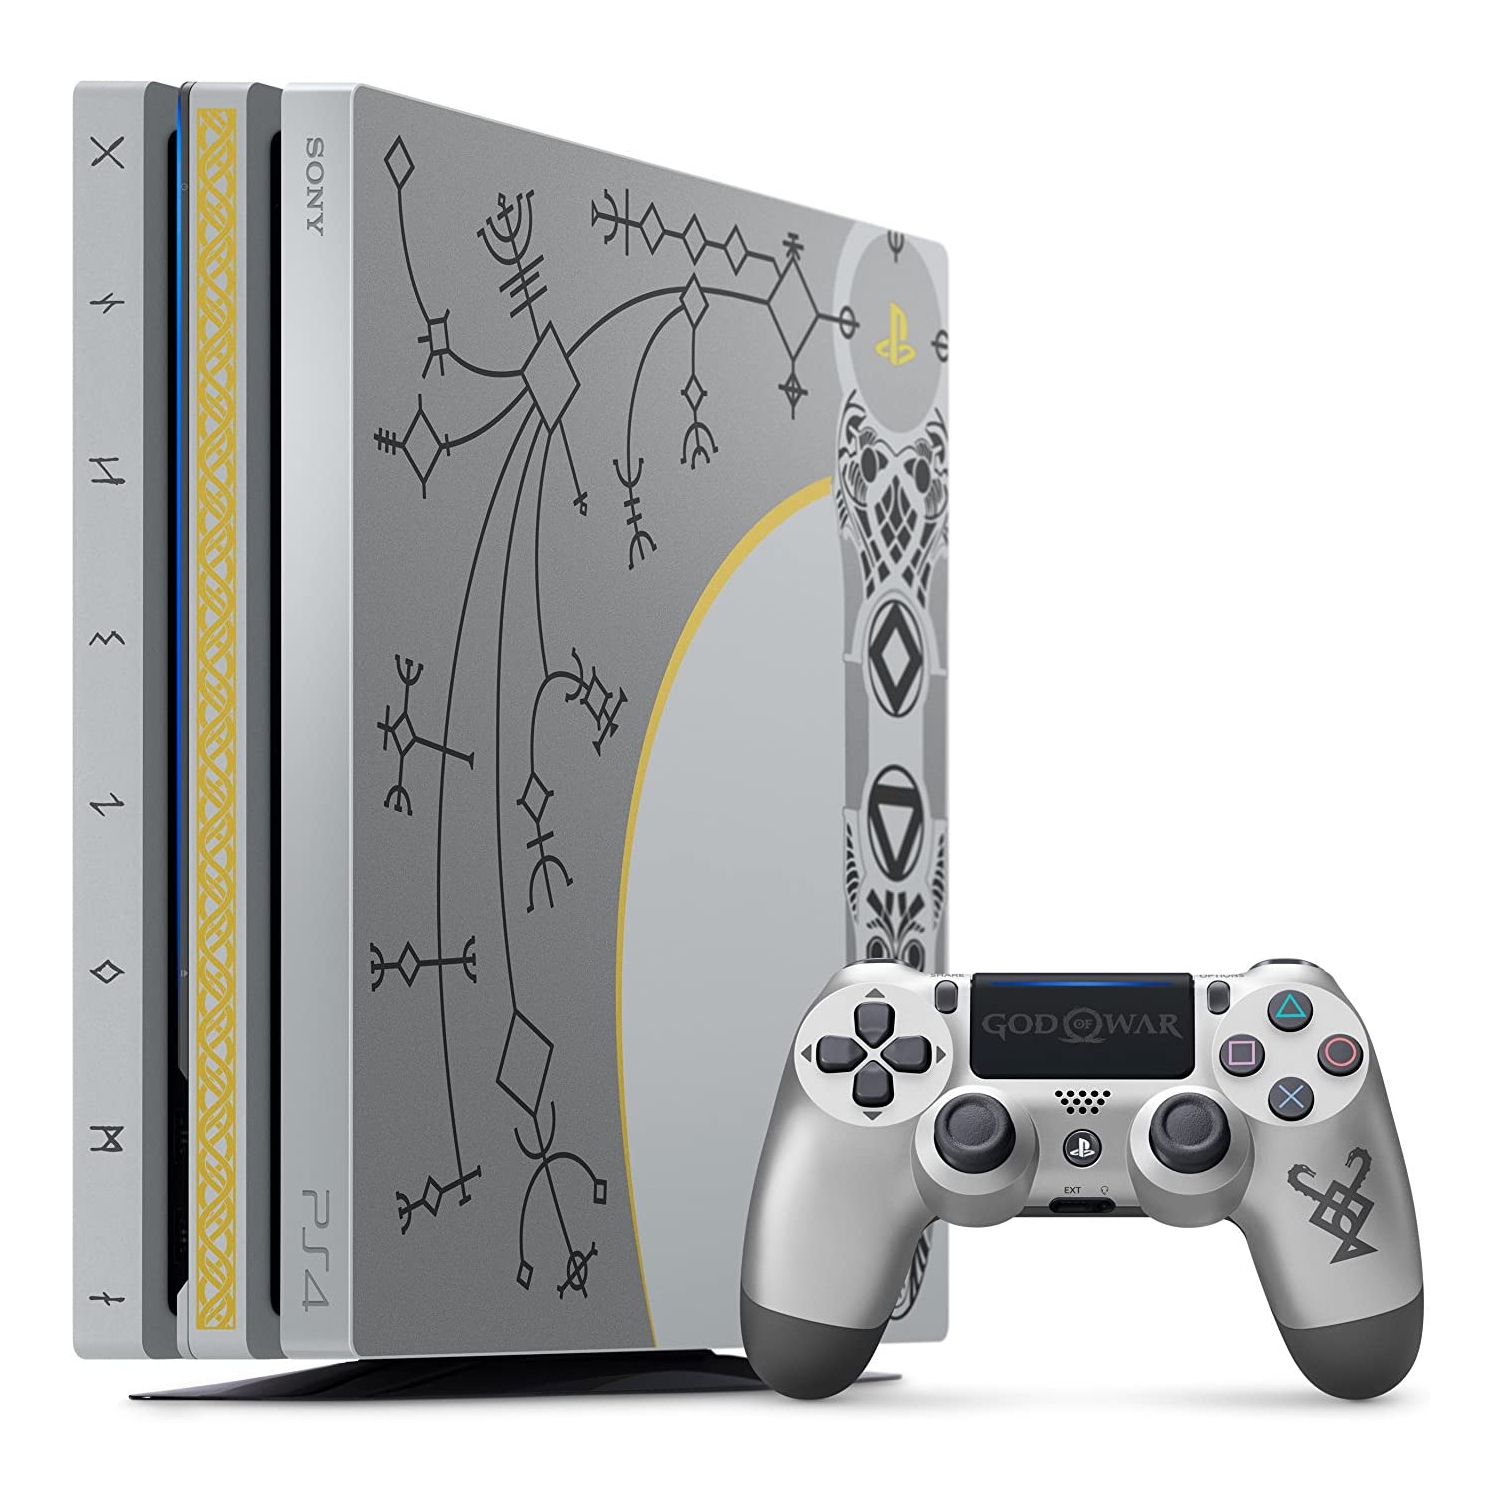 Refurbished (Excellent) - Sony PlayStation Pro God Of War Edition 1TB - CUH7115B - Certified Refurbished